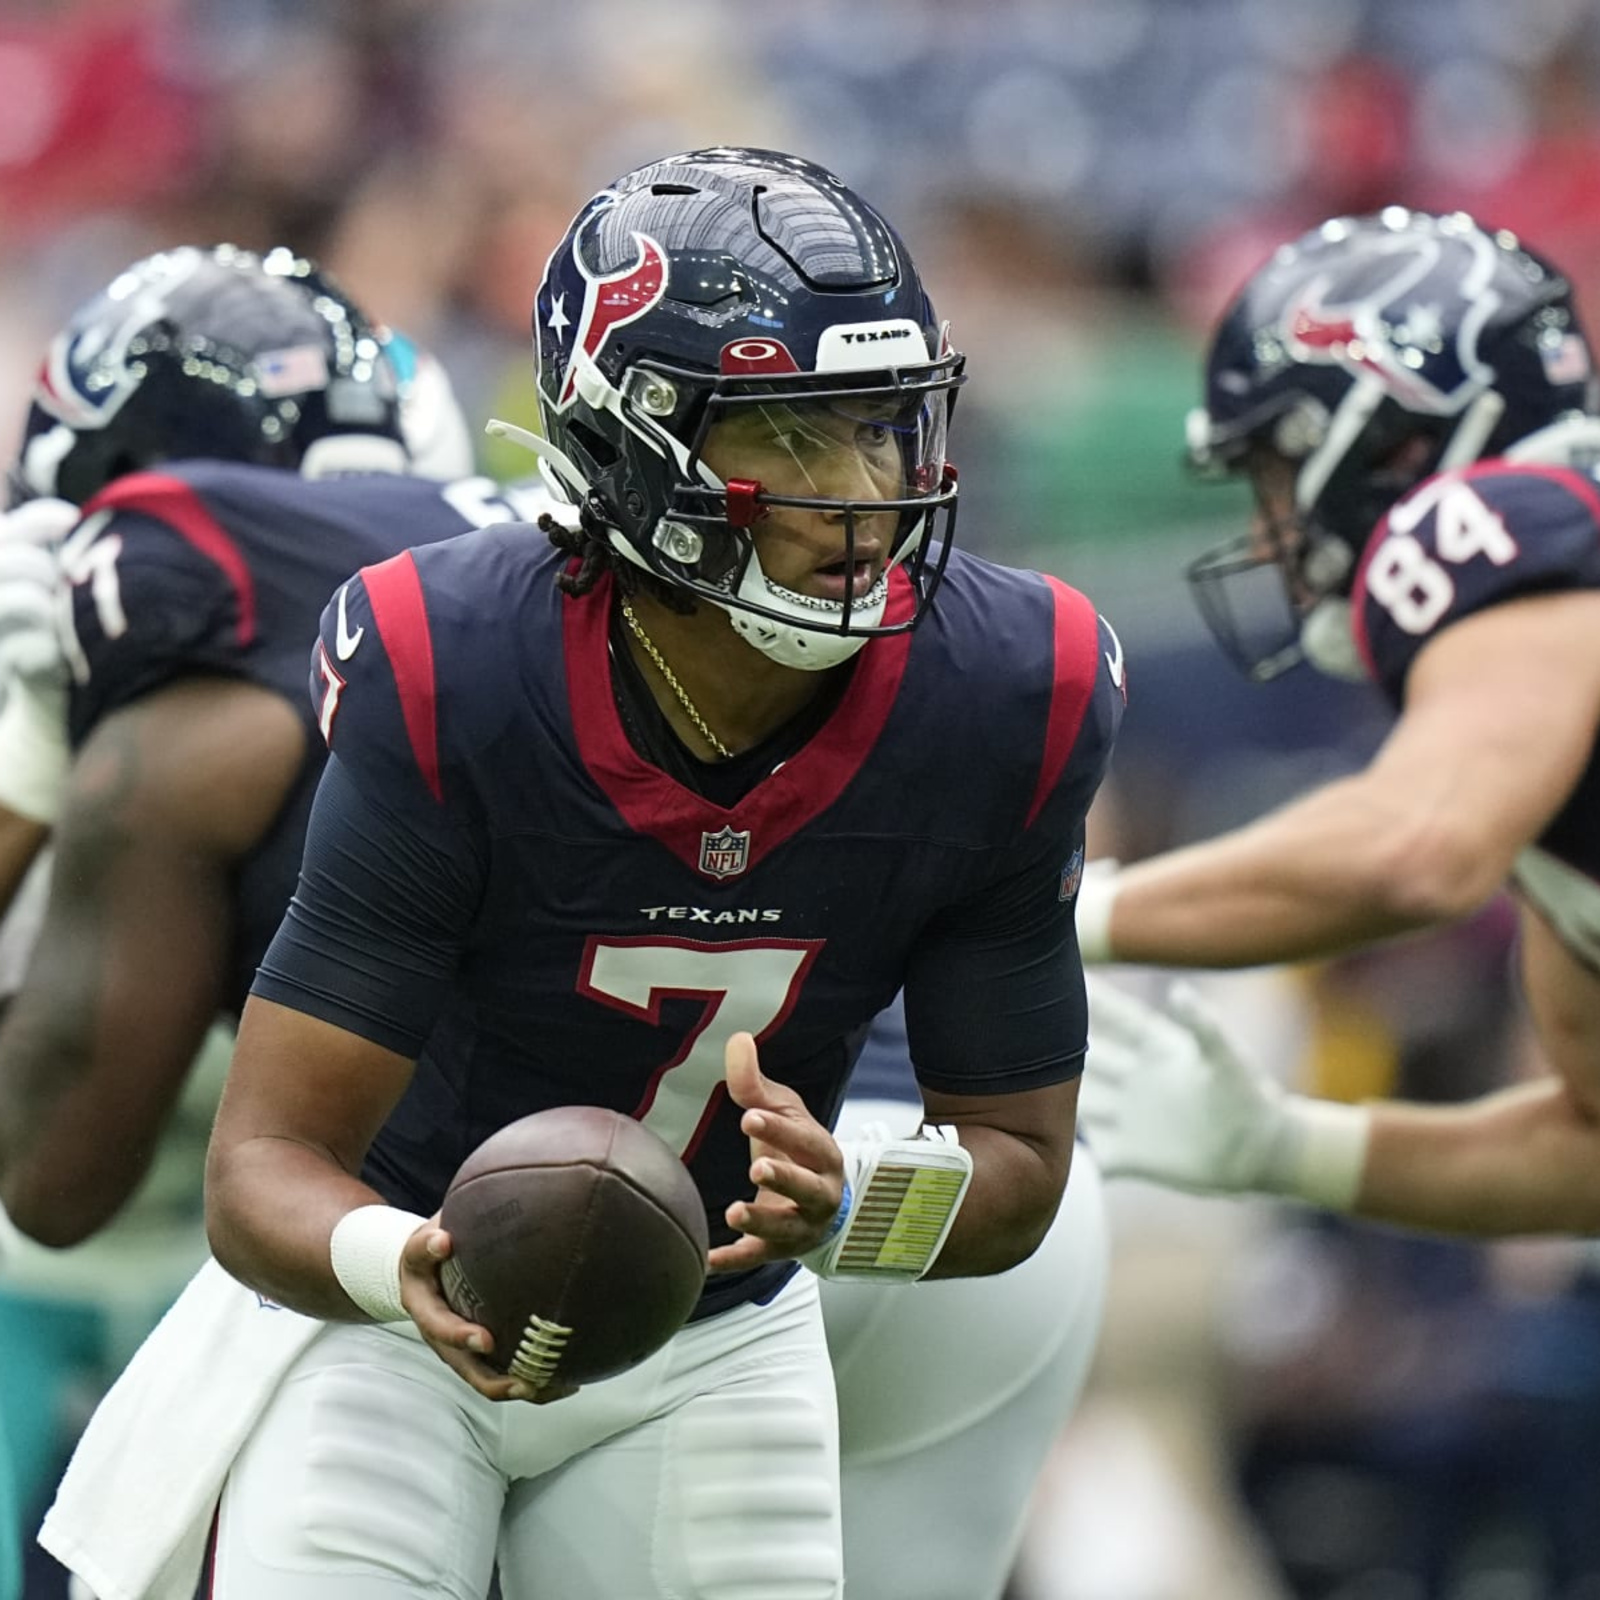 Texans ready to show improvement in 2023